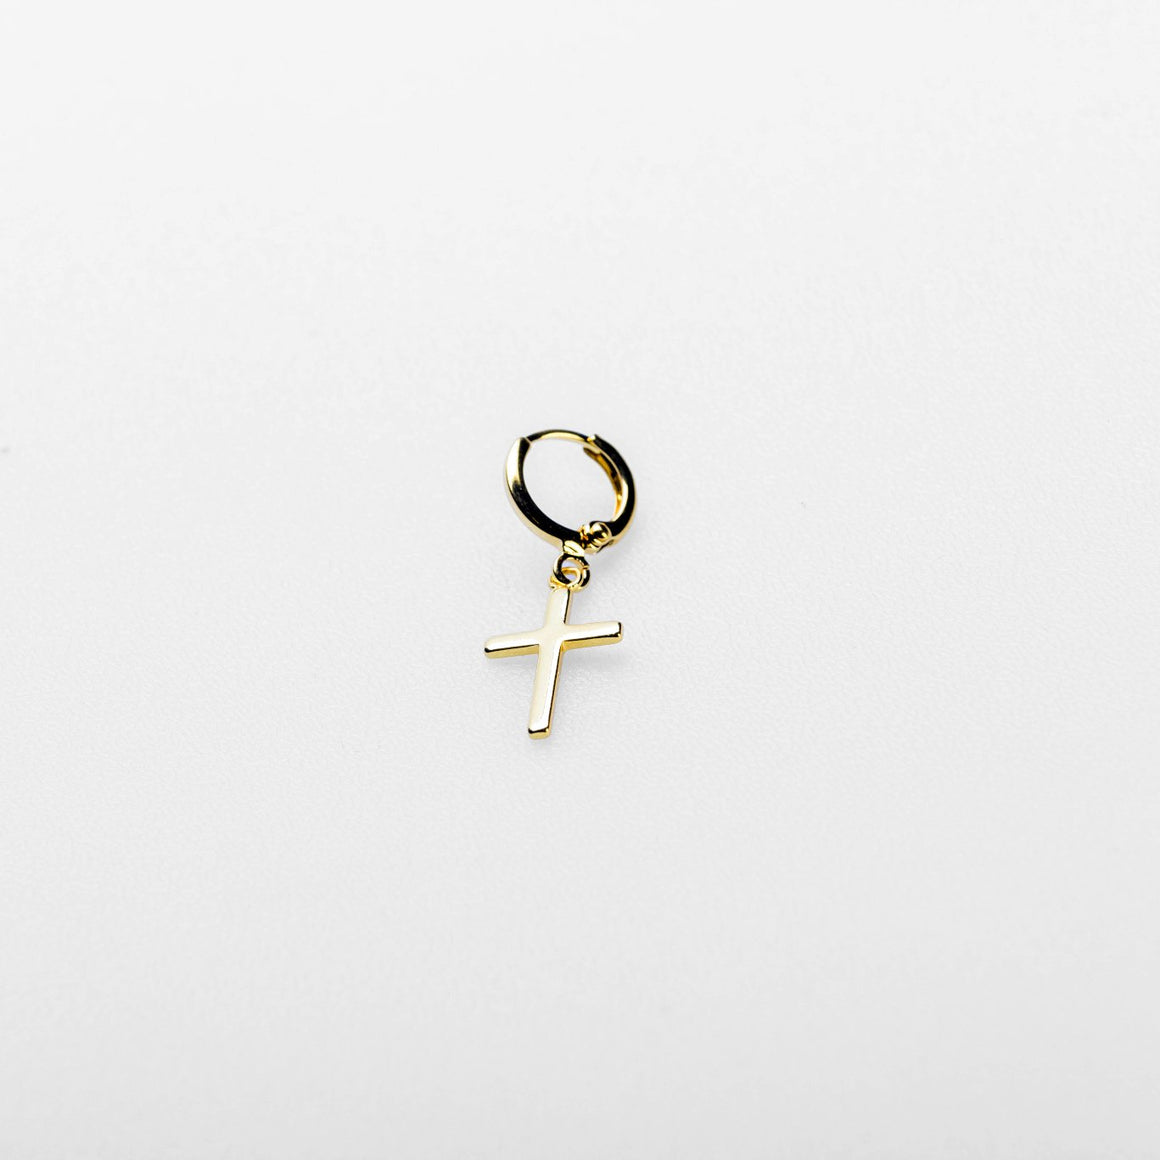 KEENA HANGING CROSS EARRING | SILVER EARRINGS Urban Clothing from 54 Floral Clothing